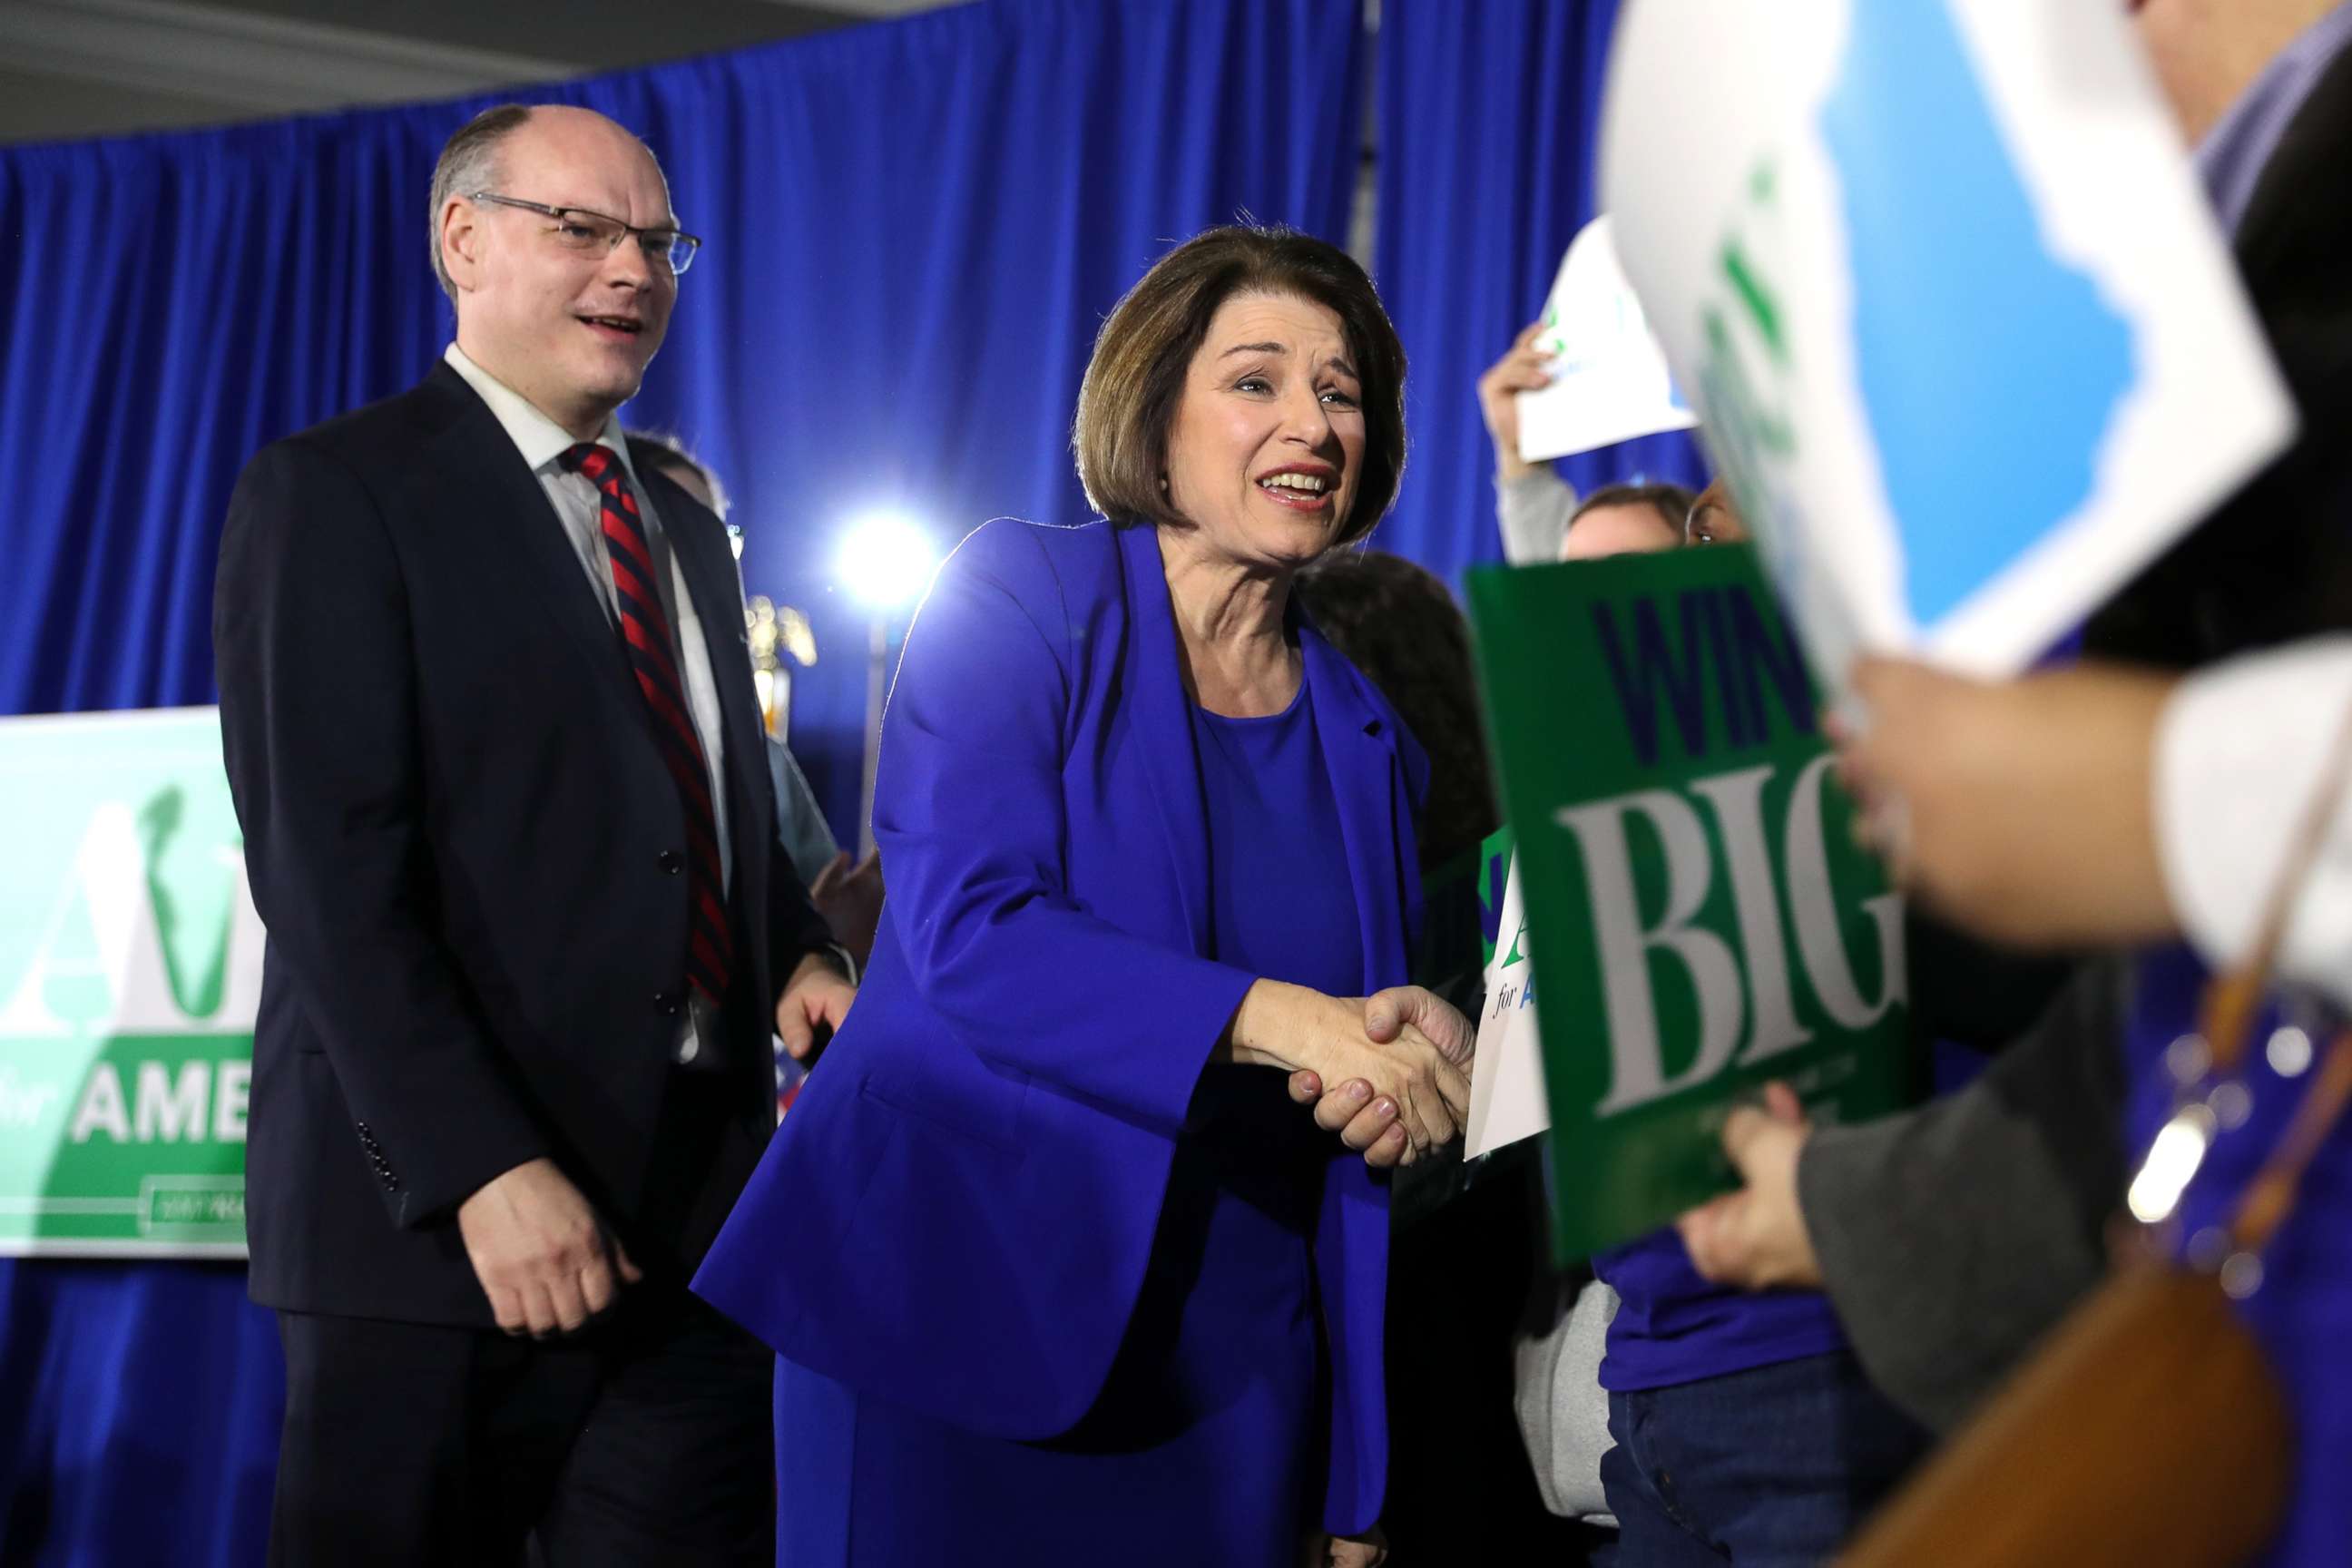 PHOTO: Democratic presidential candidate Sen. Amy Klobuchar takes the stage with spouse John Bessler during a primary night event, Feb. 11, 2020, in Concord, N.H.